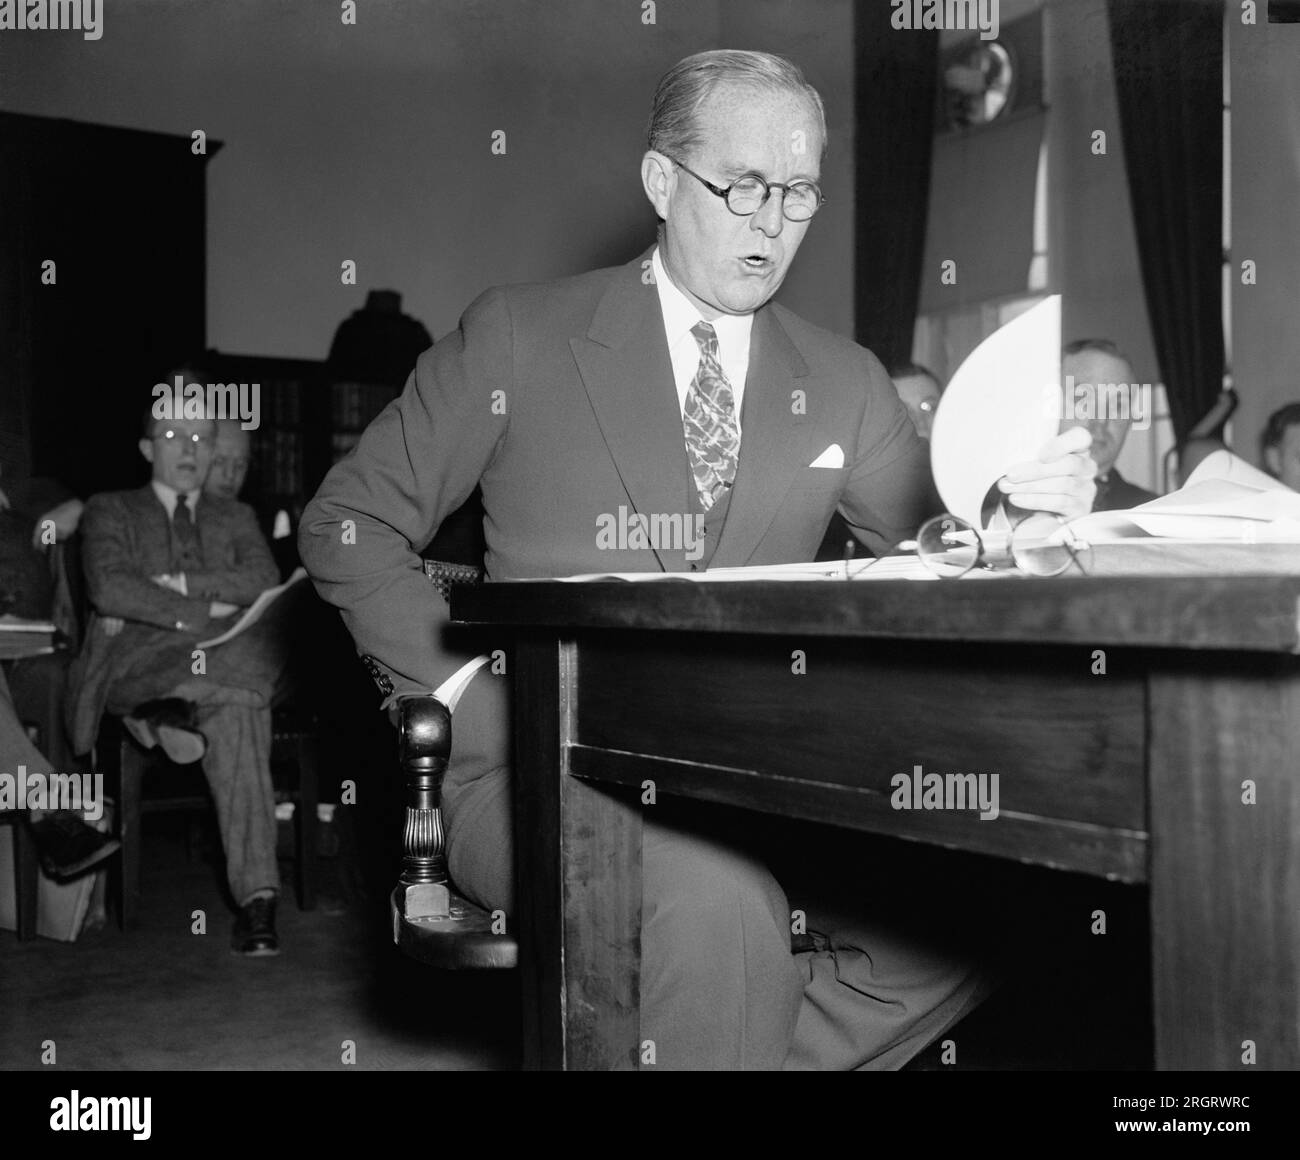 Washington, D.C.:  December 3, 1937  Joseph P. Kennedy, Chairman of the U.S. Maritime Commission, as he recently appeared before a Congressional committee. Stock Photo